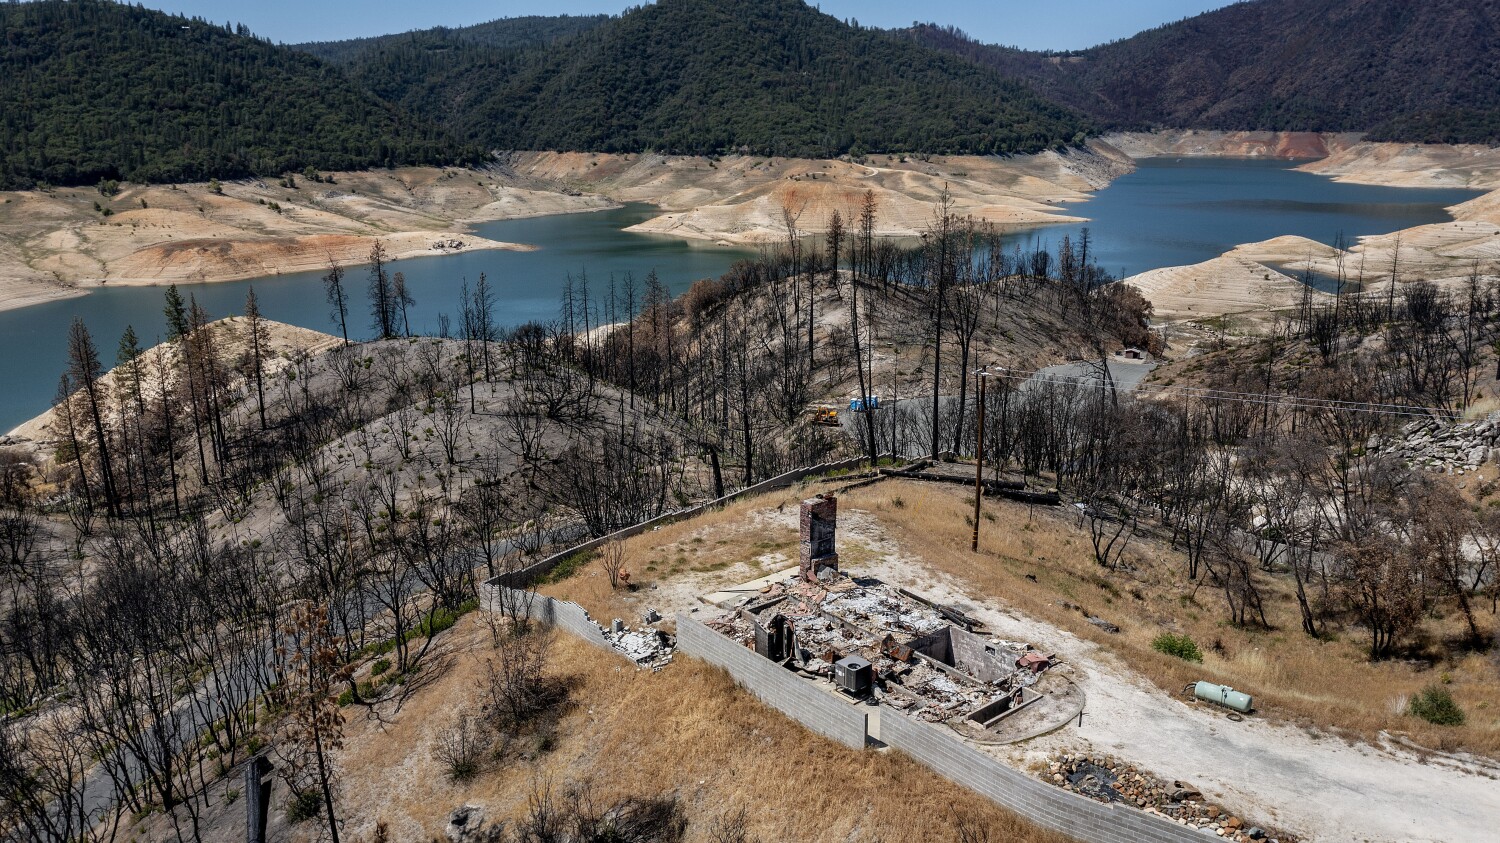 California's drought and wildfire dangers rising at stunning pace